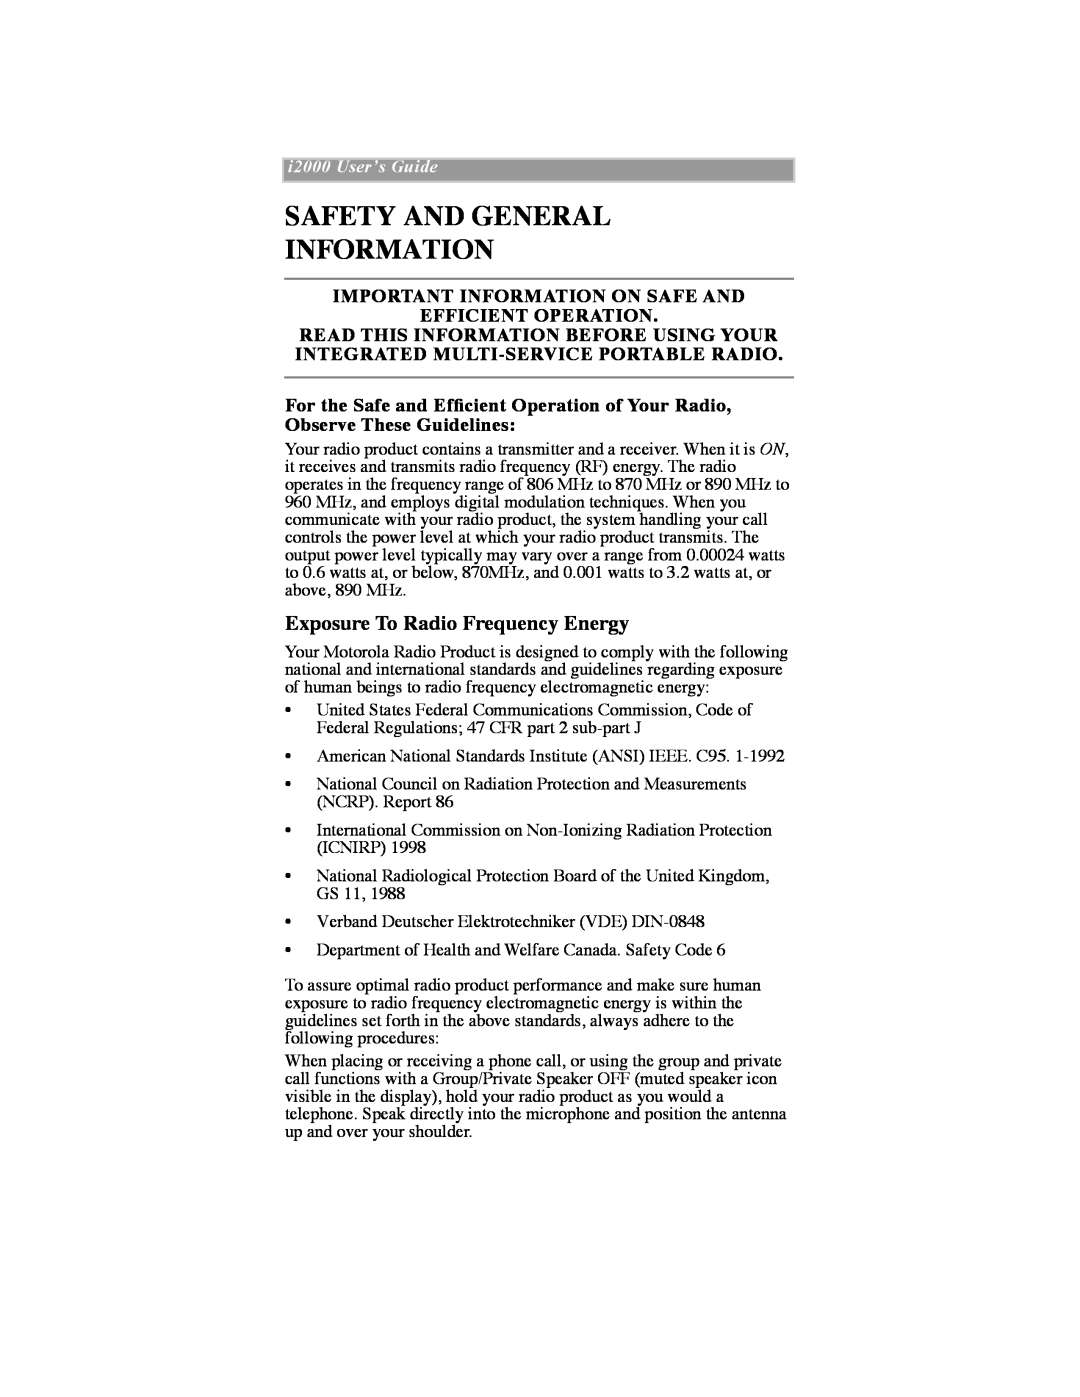 Motorola iDEN manual Safety And General Information, Exposure To Radio Frequency Energy, i2000 UserÕs Guide 